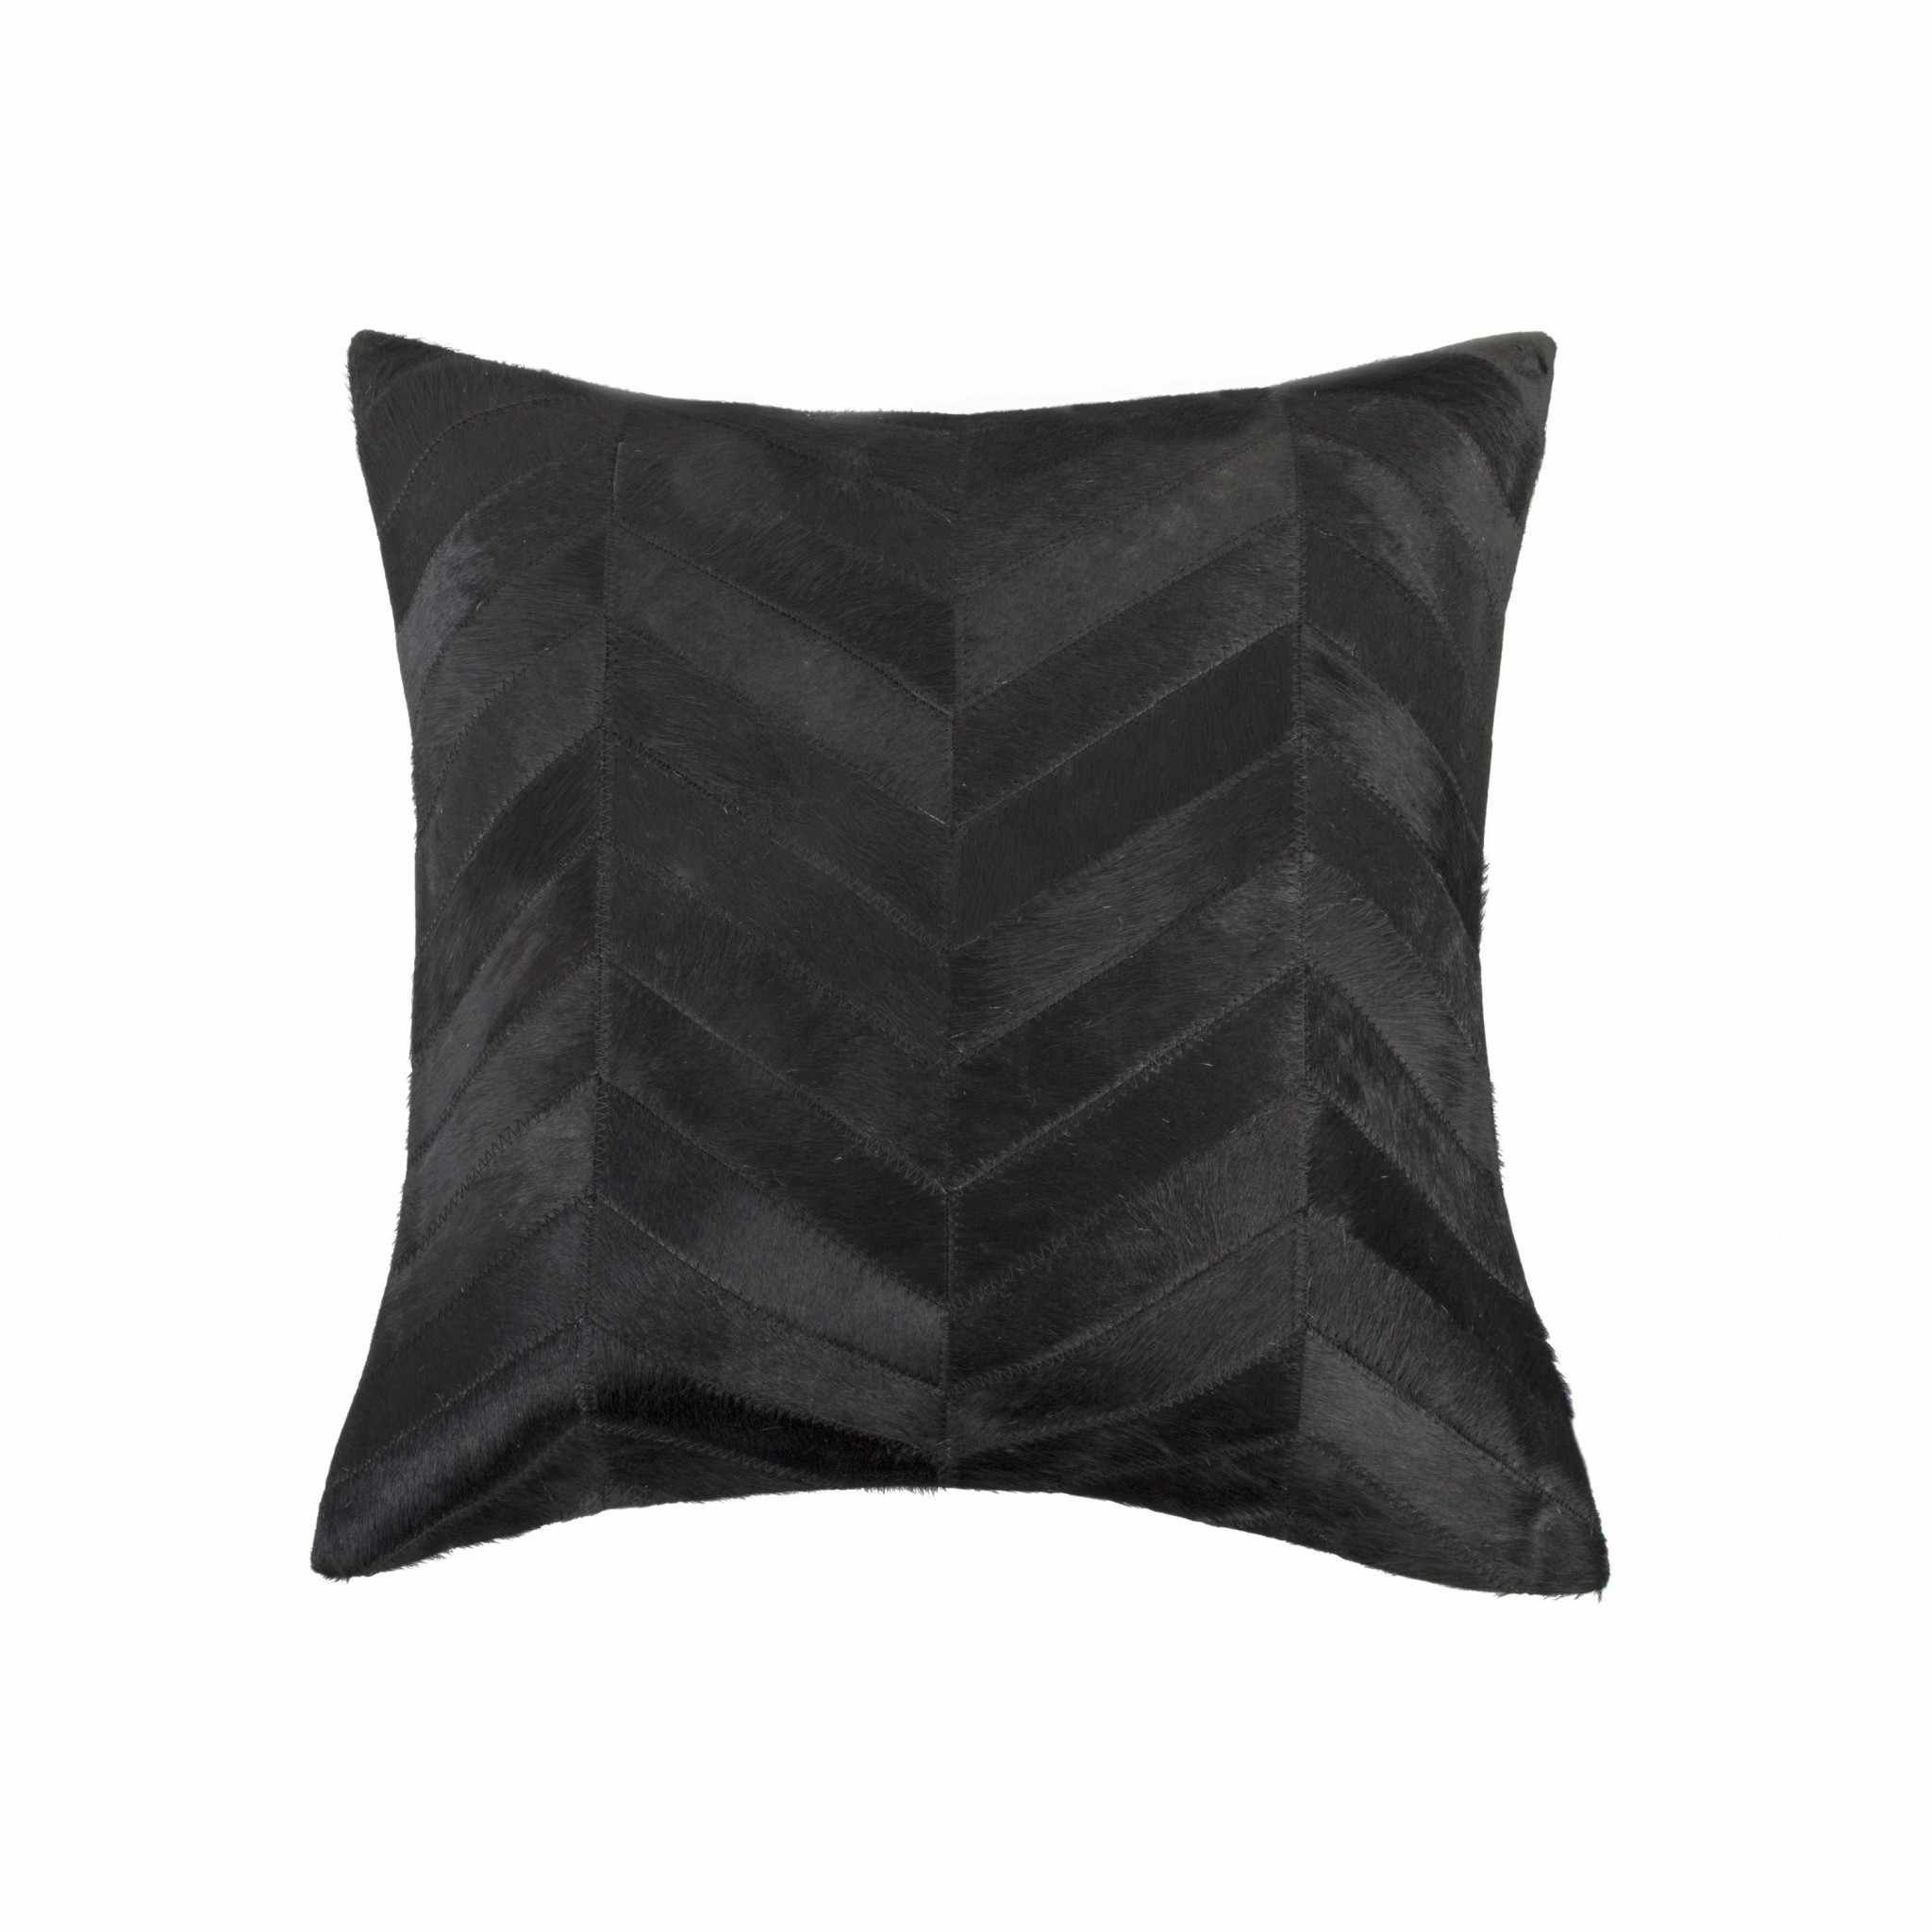 18" x 18" x 5" Black And Natural - Pillow